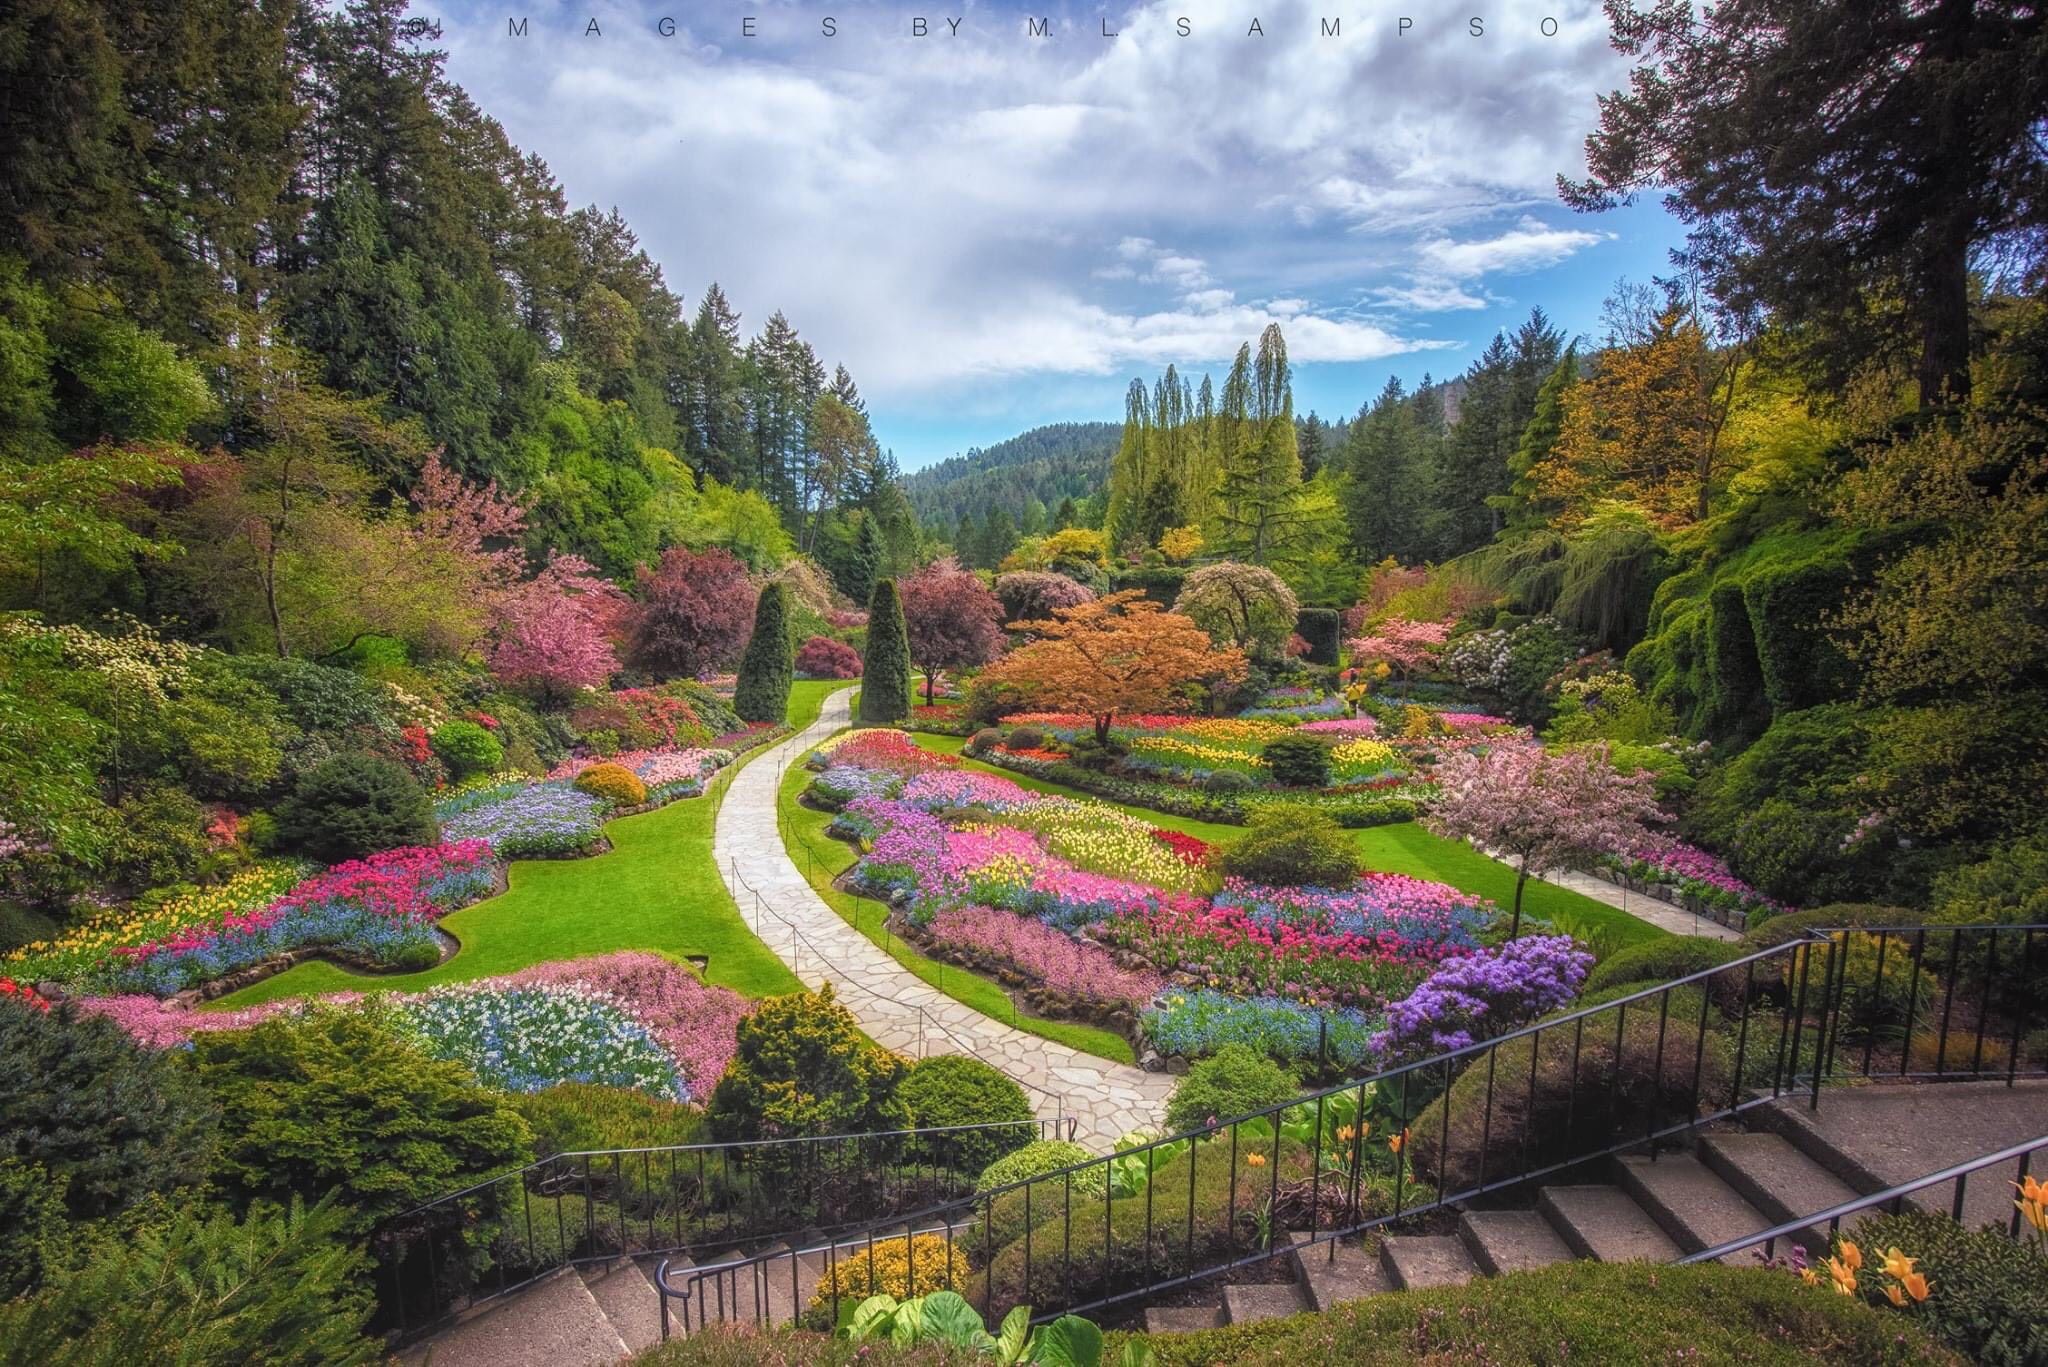 Butchart Gardens ranked one of the most beautiful gardens in the world